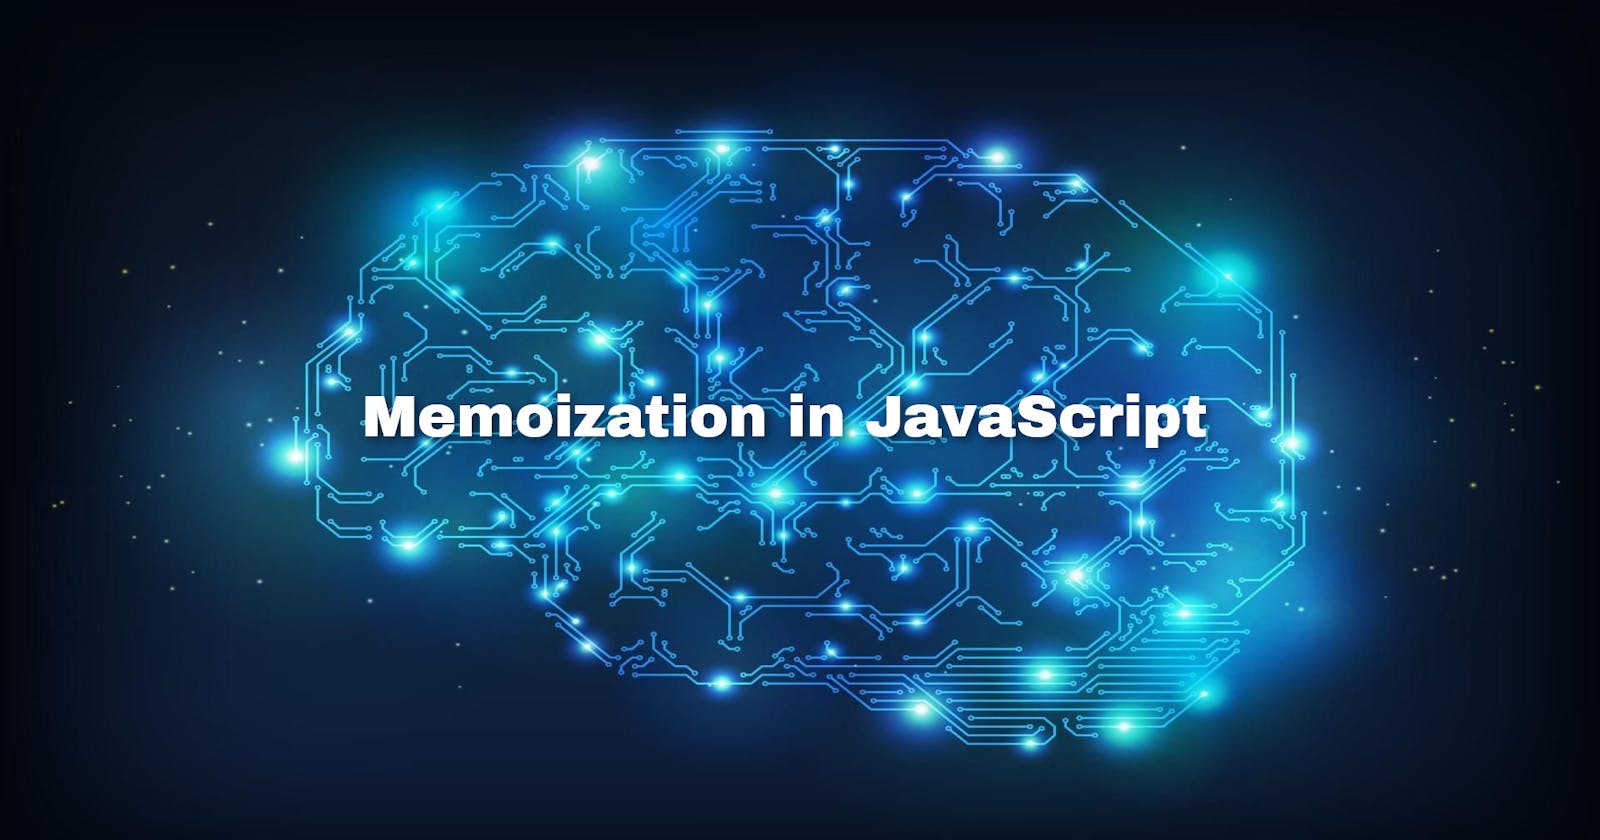 Memoization in JavaScript? And how to apply it to get better code performance.